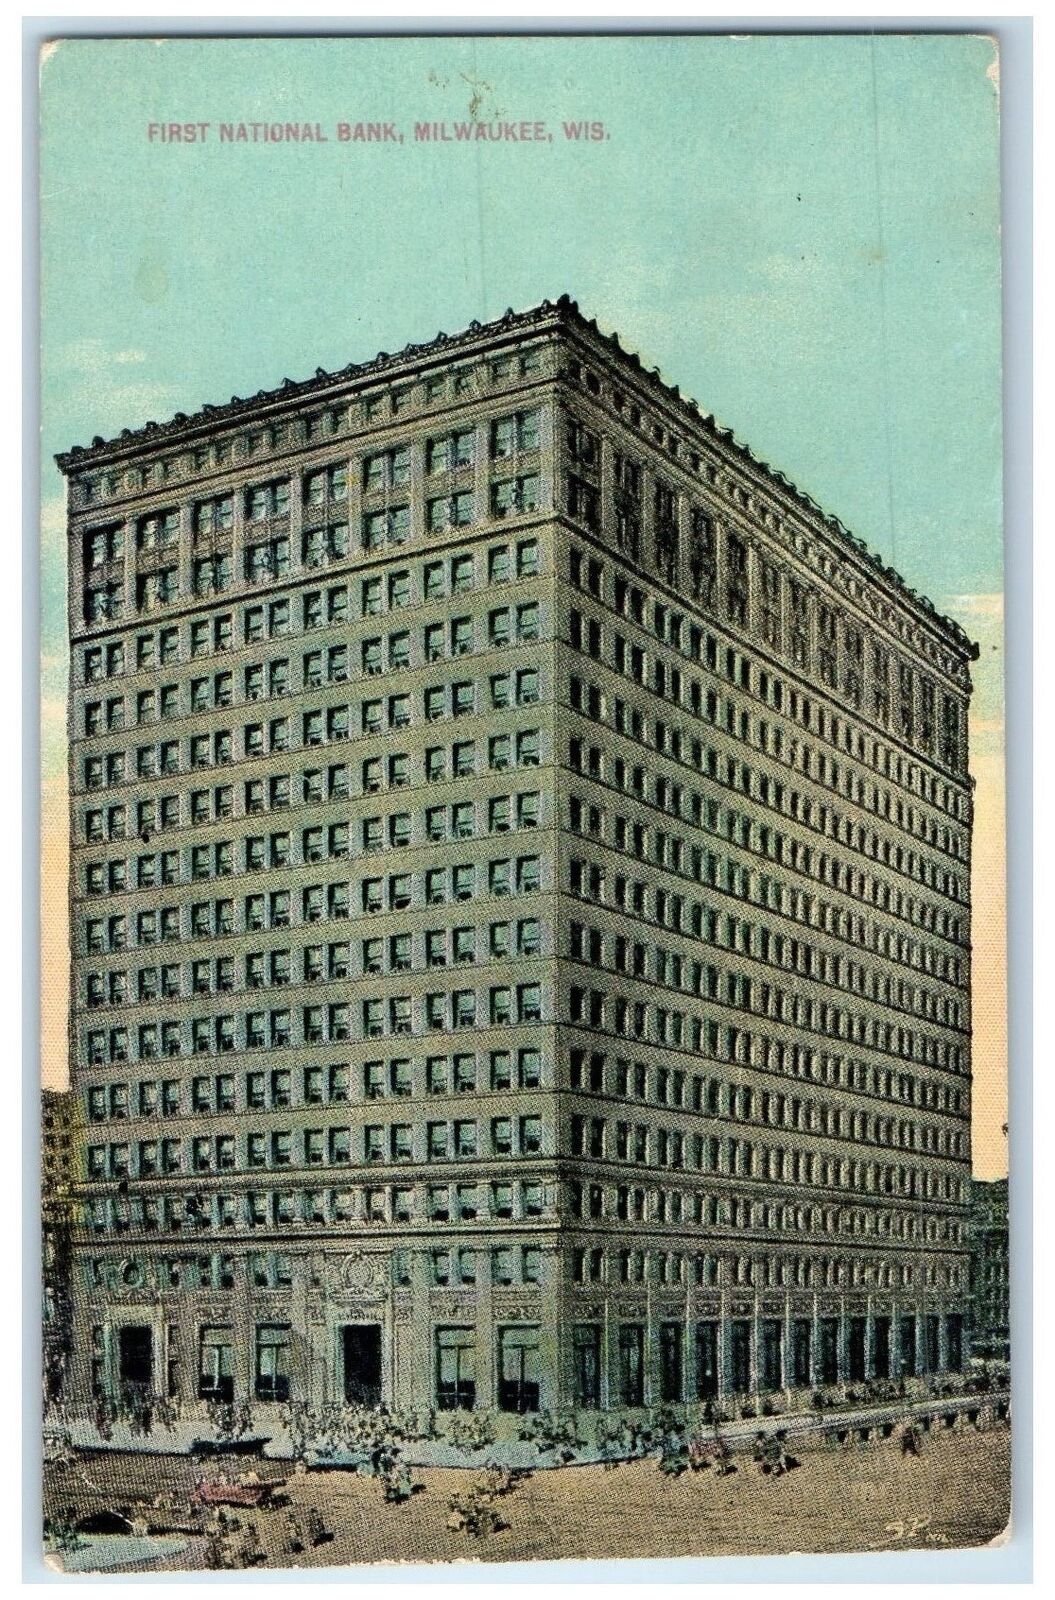 1914 First National Bank Building Crowd Classic Car Milwaukee Wisconsin Postcard